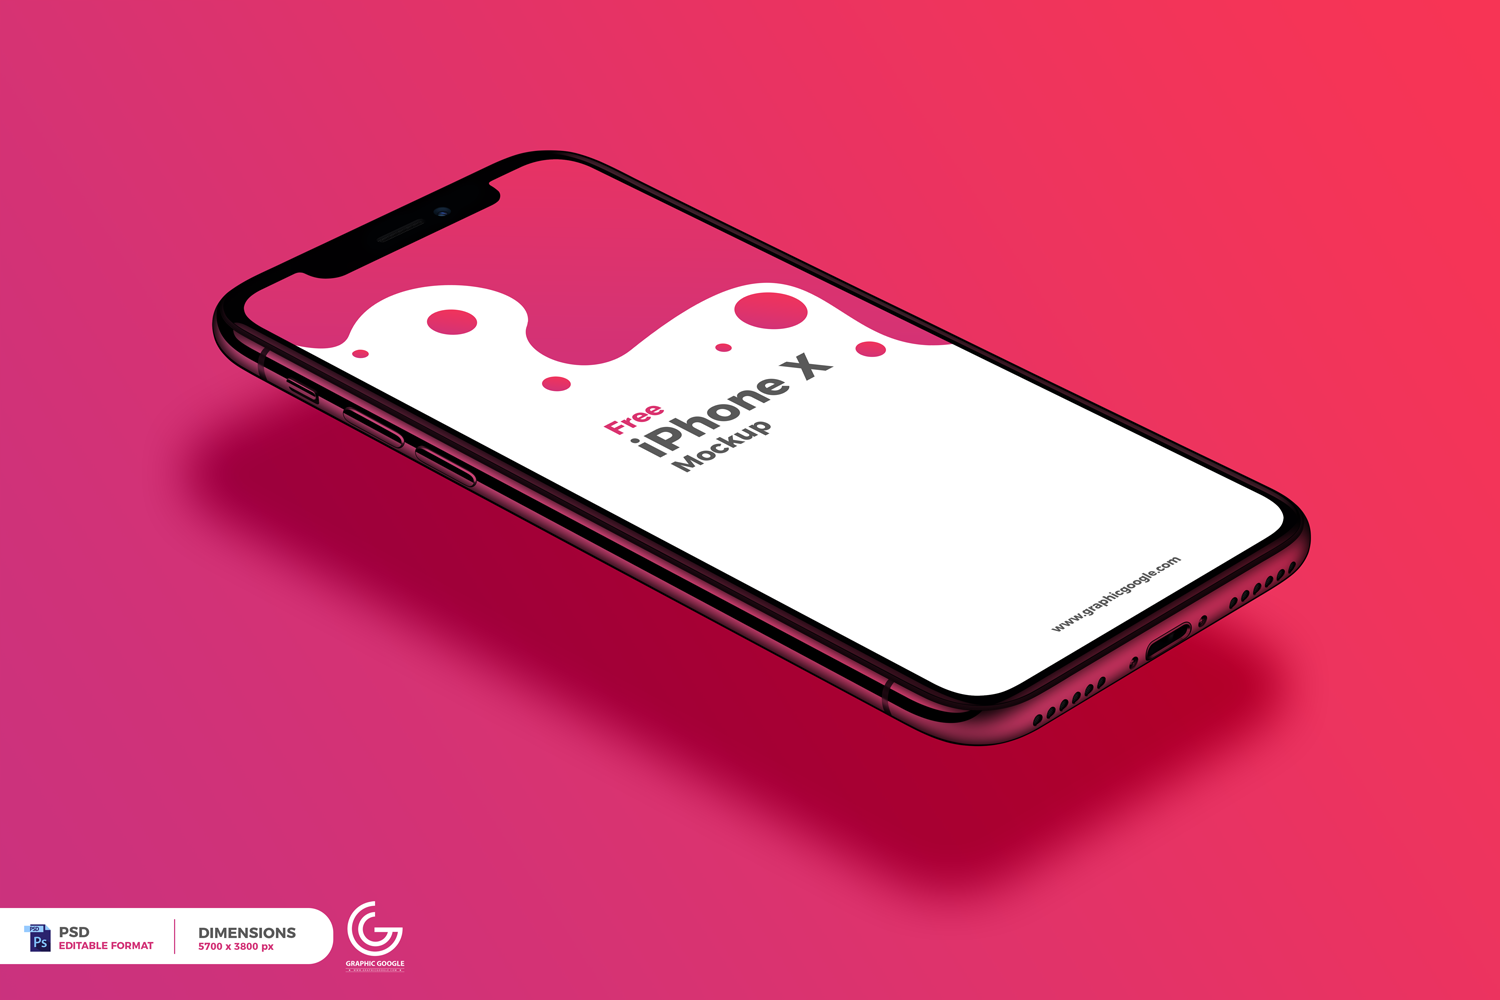 Free-Perspective-View-iPhone-X-Mockup